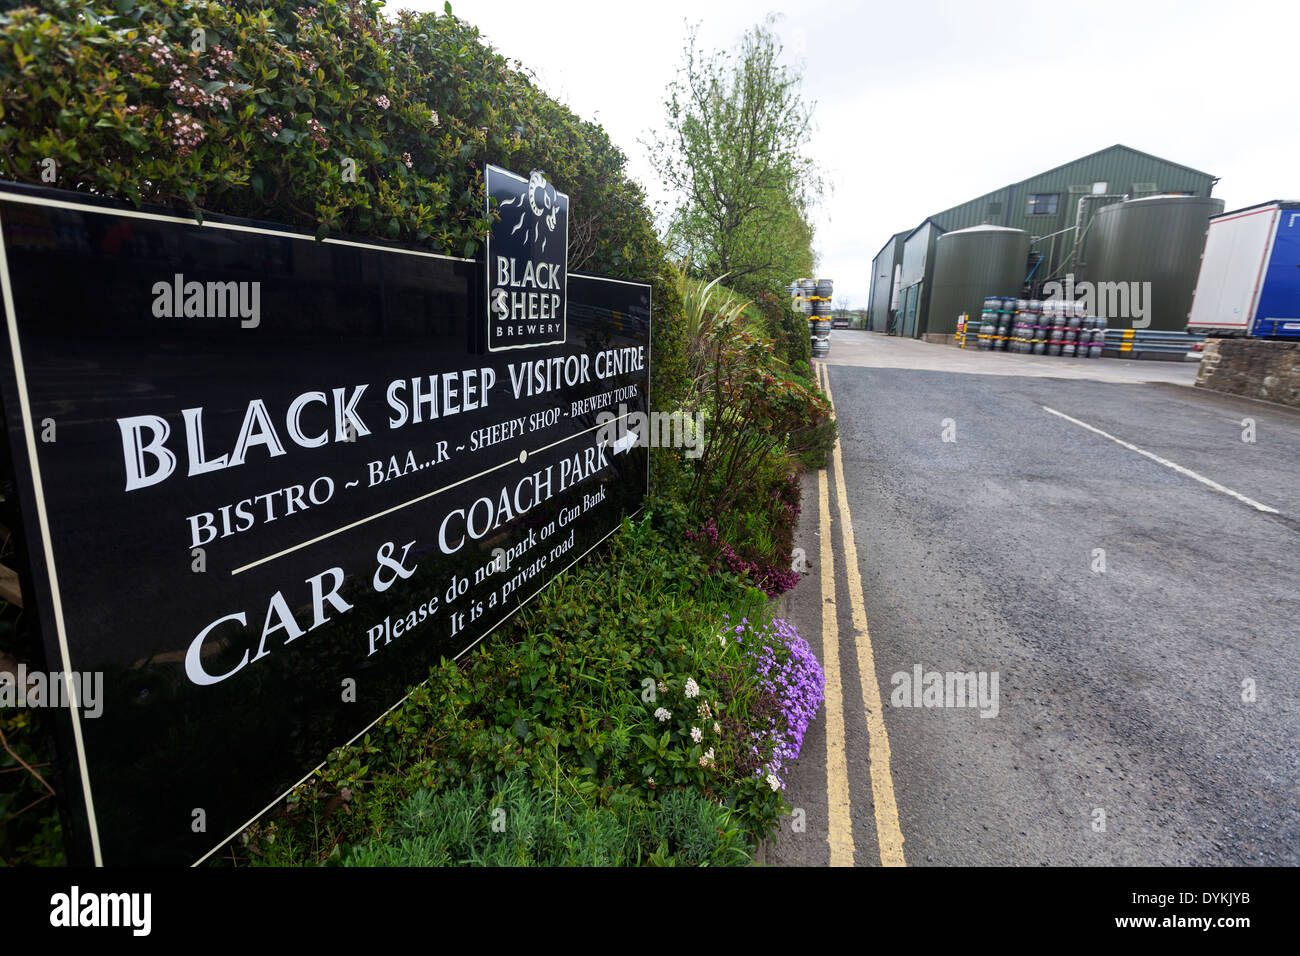 Black Sheep brewery visitor Centre sign Yorkshire Dales National Park, UK England GB Stock Photo